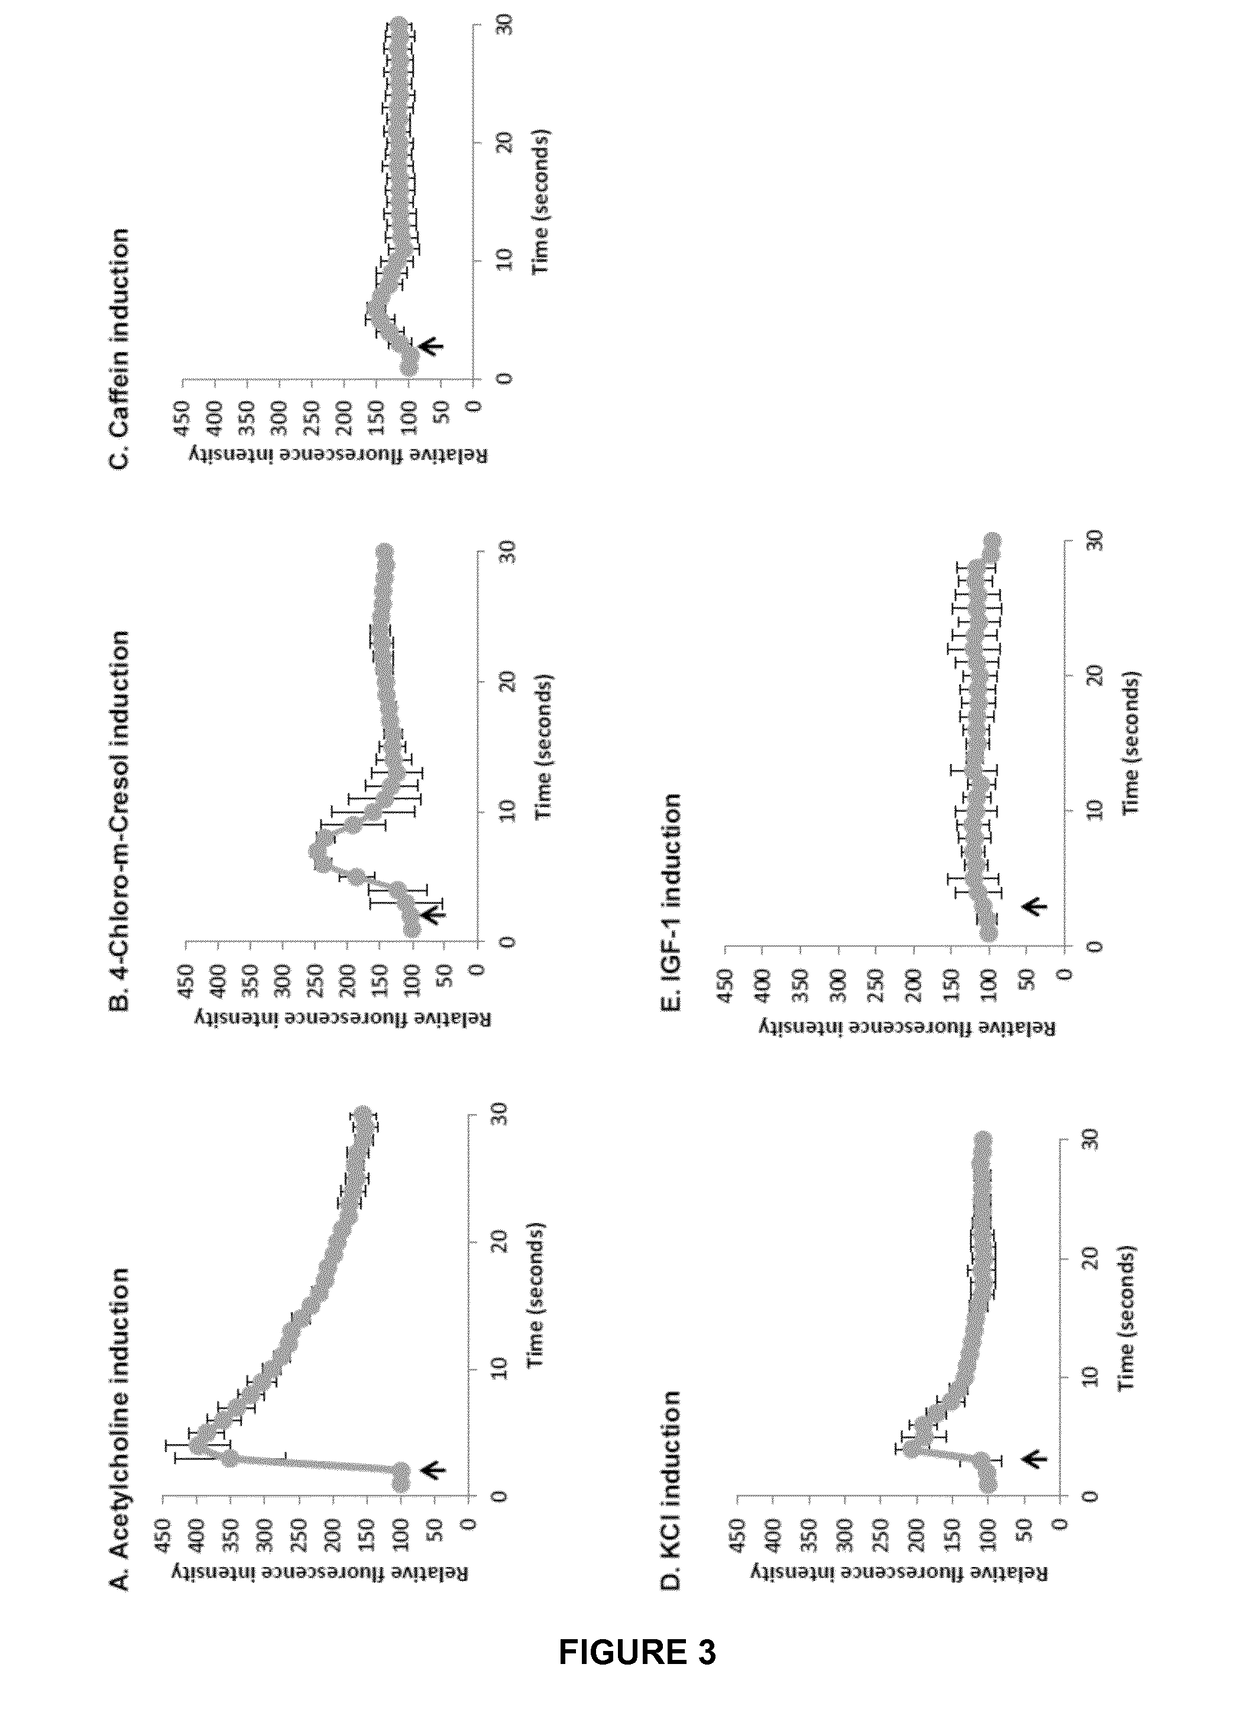 High throughput and functional screening method for muscle related disorders and biological processes